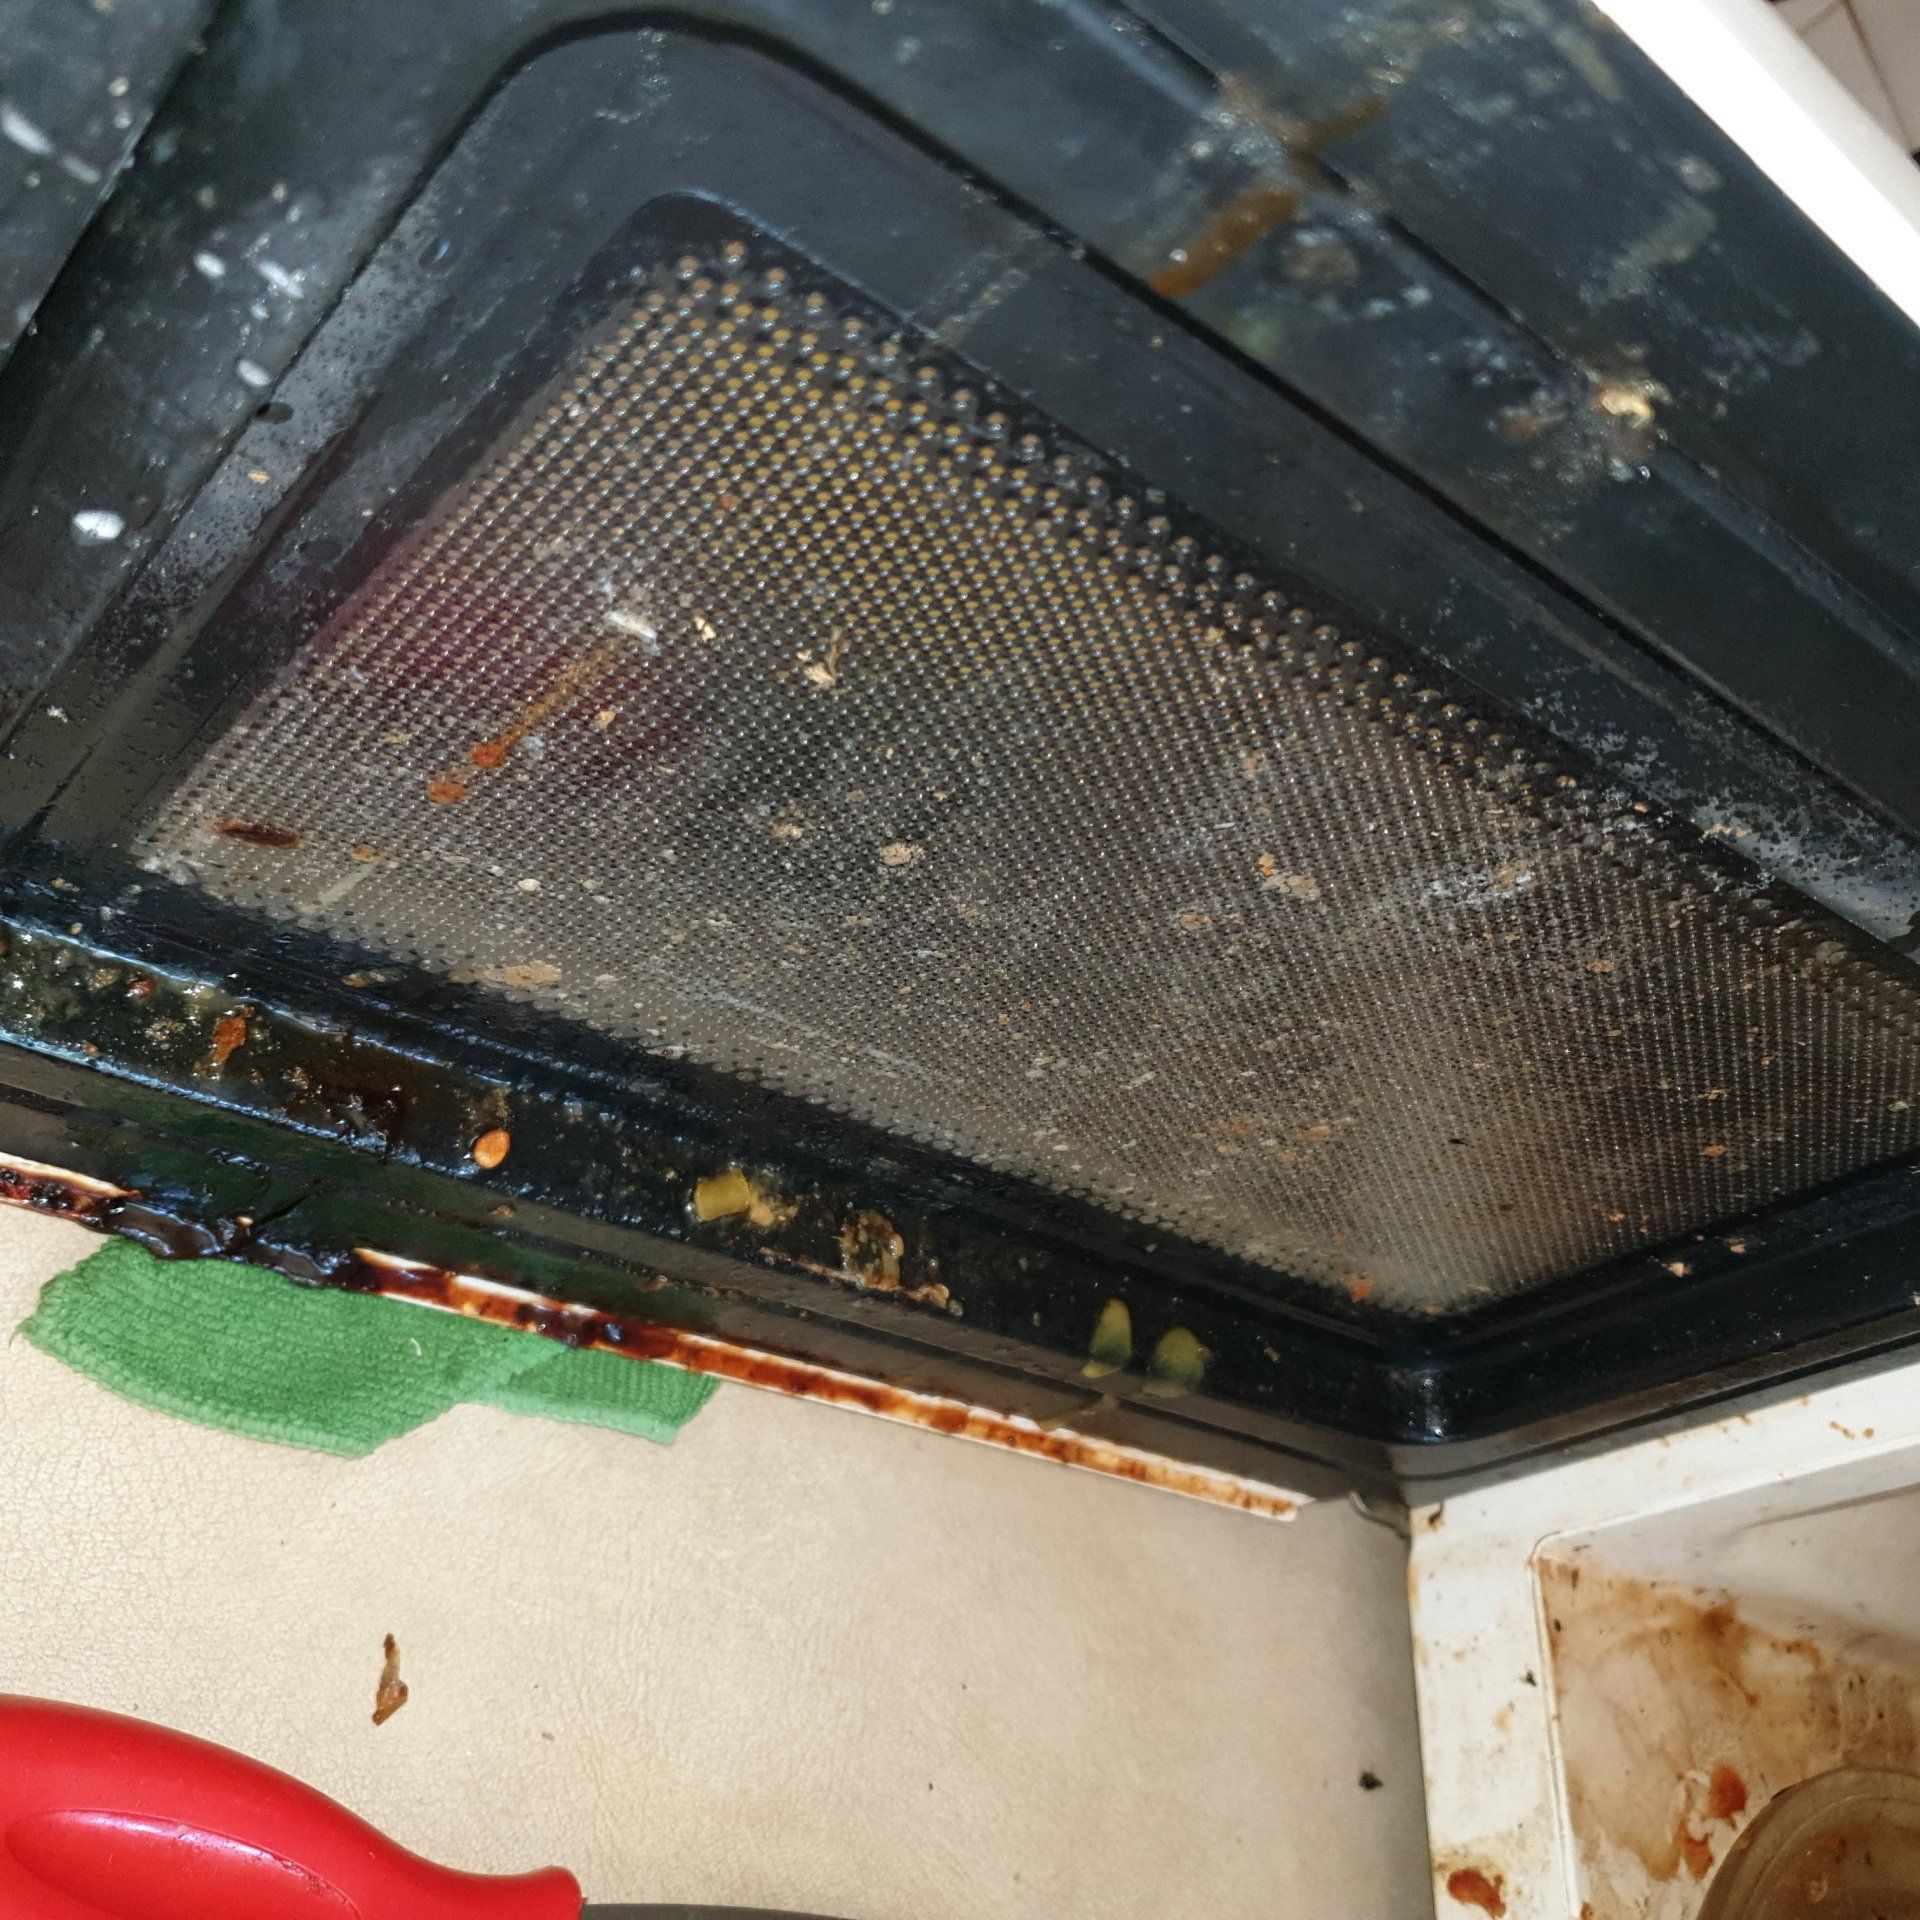 A n extremely dirty microwave.